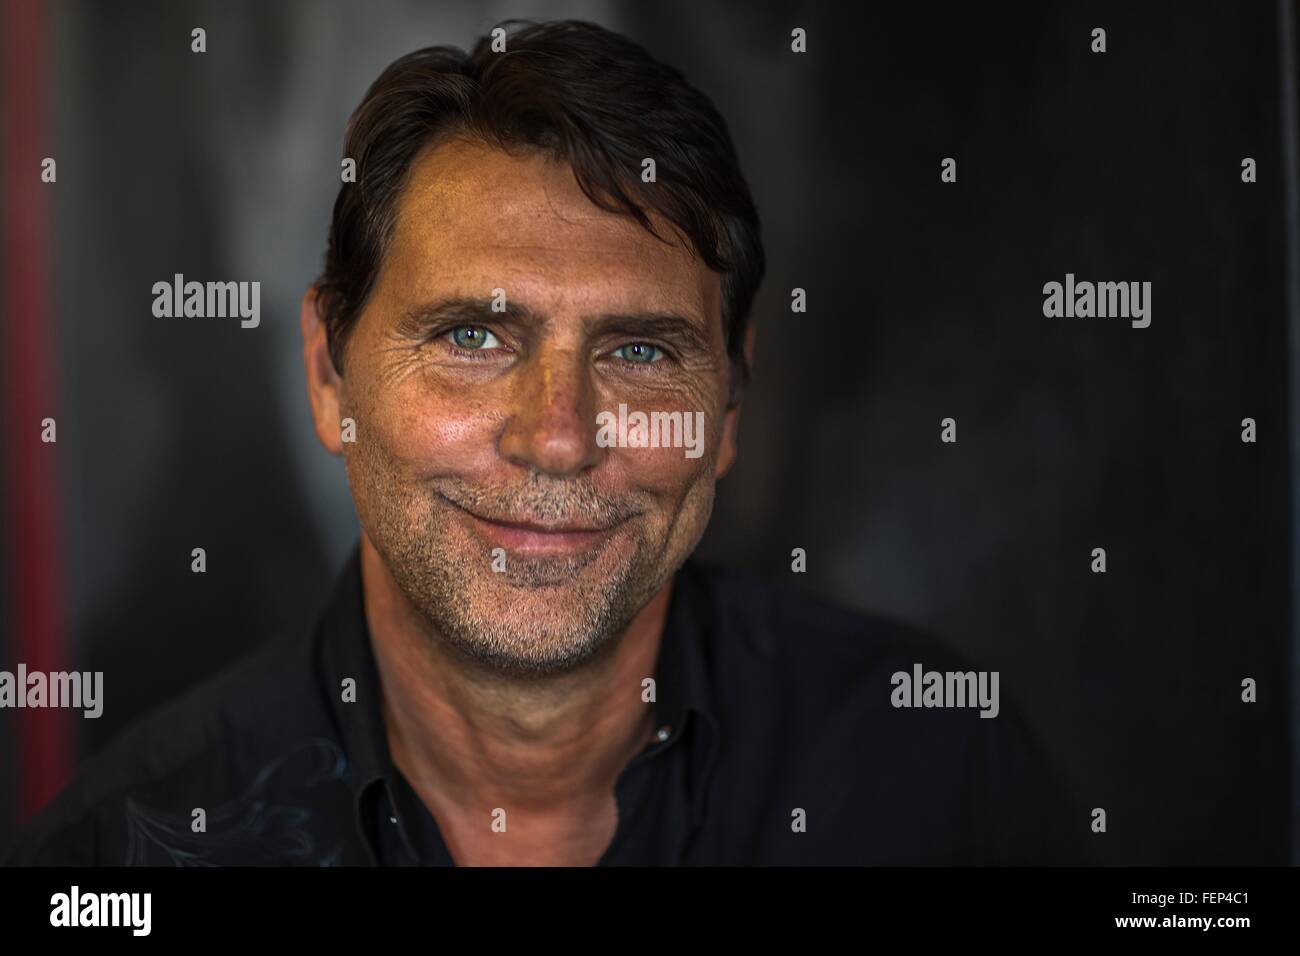 Portrait of tanned mature man looking at camera smiling Stock Photo